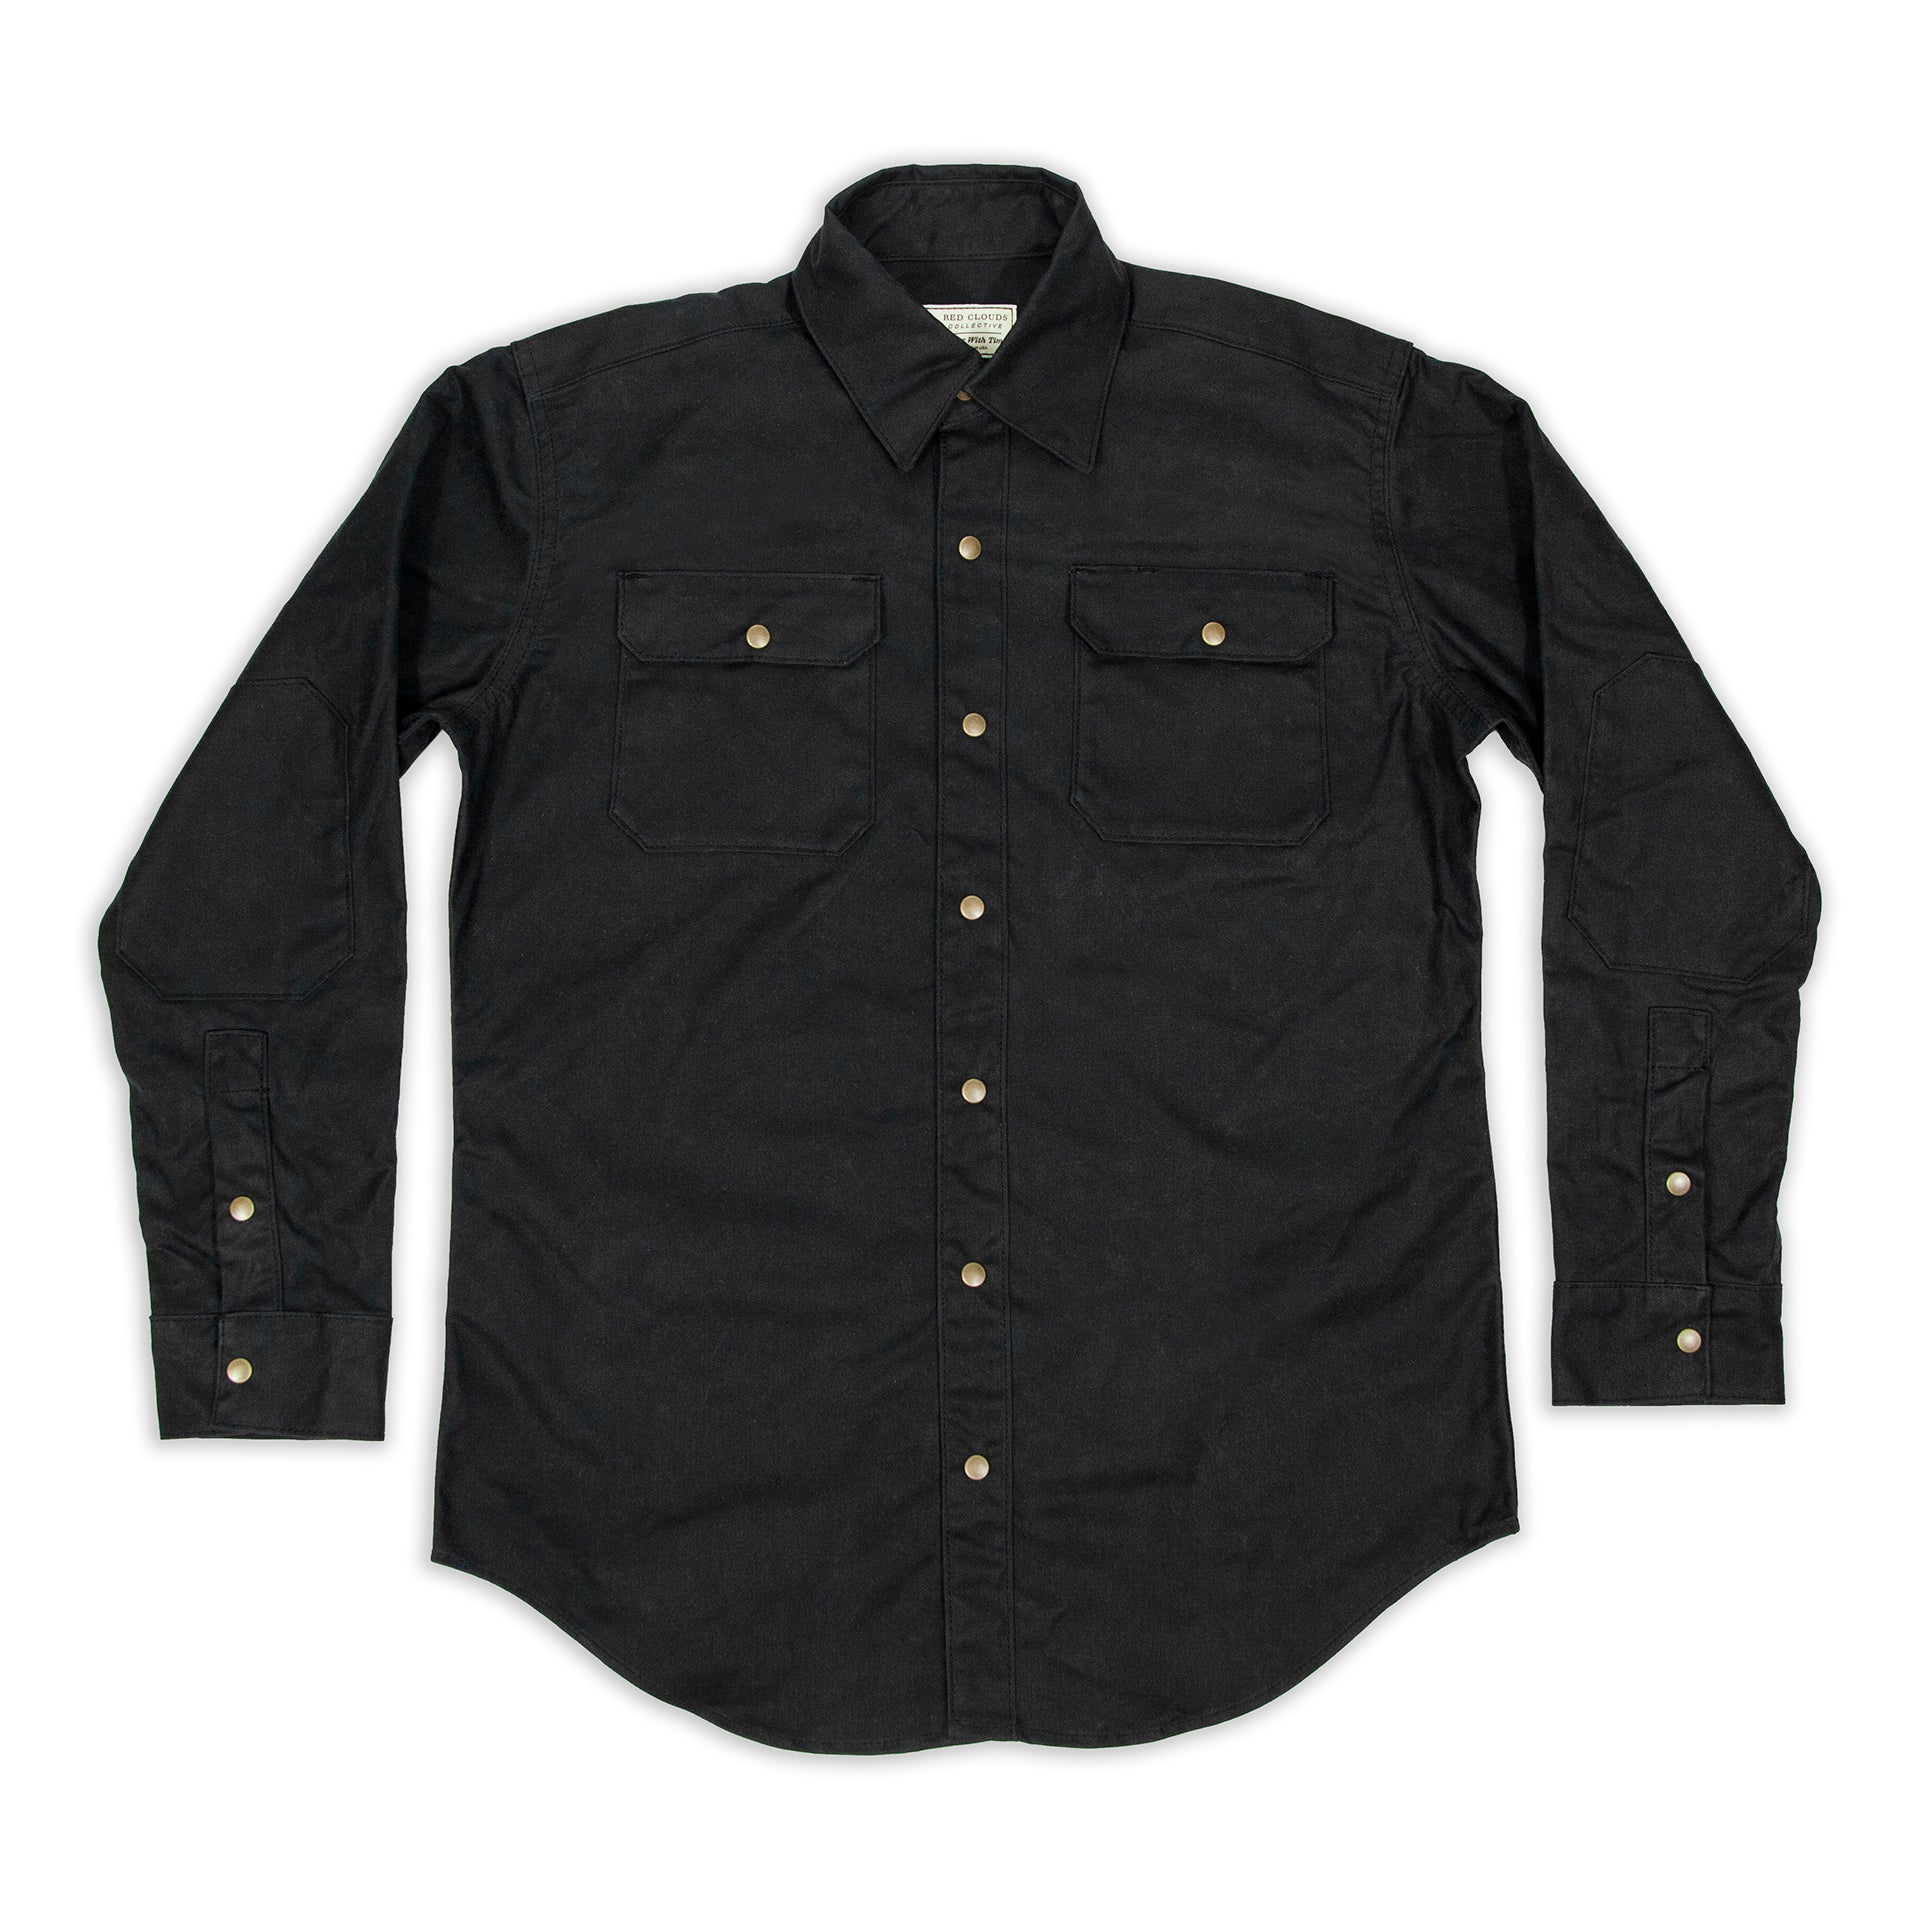 waxed canvas work shirt, work shirt, made in usa, durable shirt, heavy duty shirt, made to last, made in portland, quality clothing, durable work shirt, waxed canvas, moto, witham work shirt